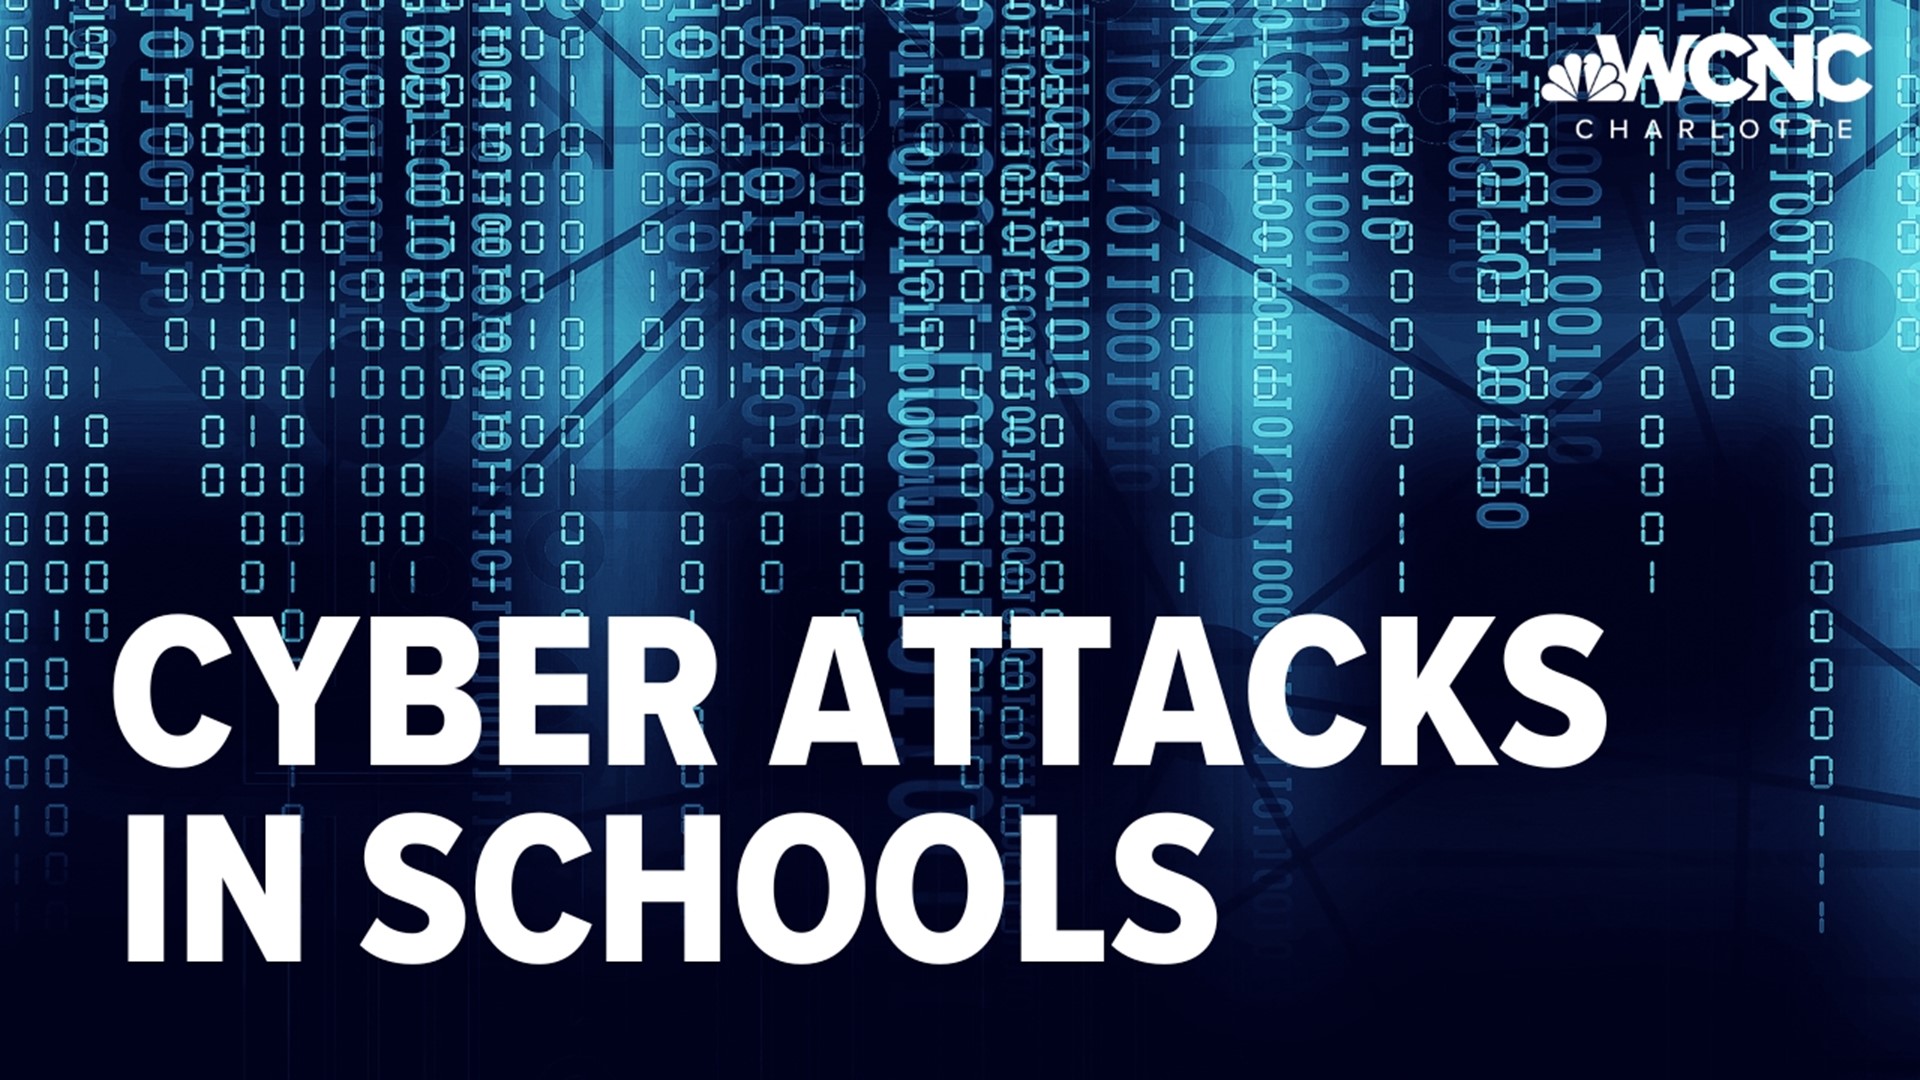 Ben Thompson connects the dots to explain why schools may not be prepared for future cyberattacks.